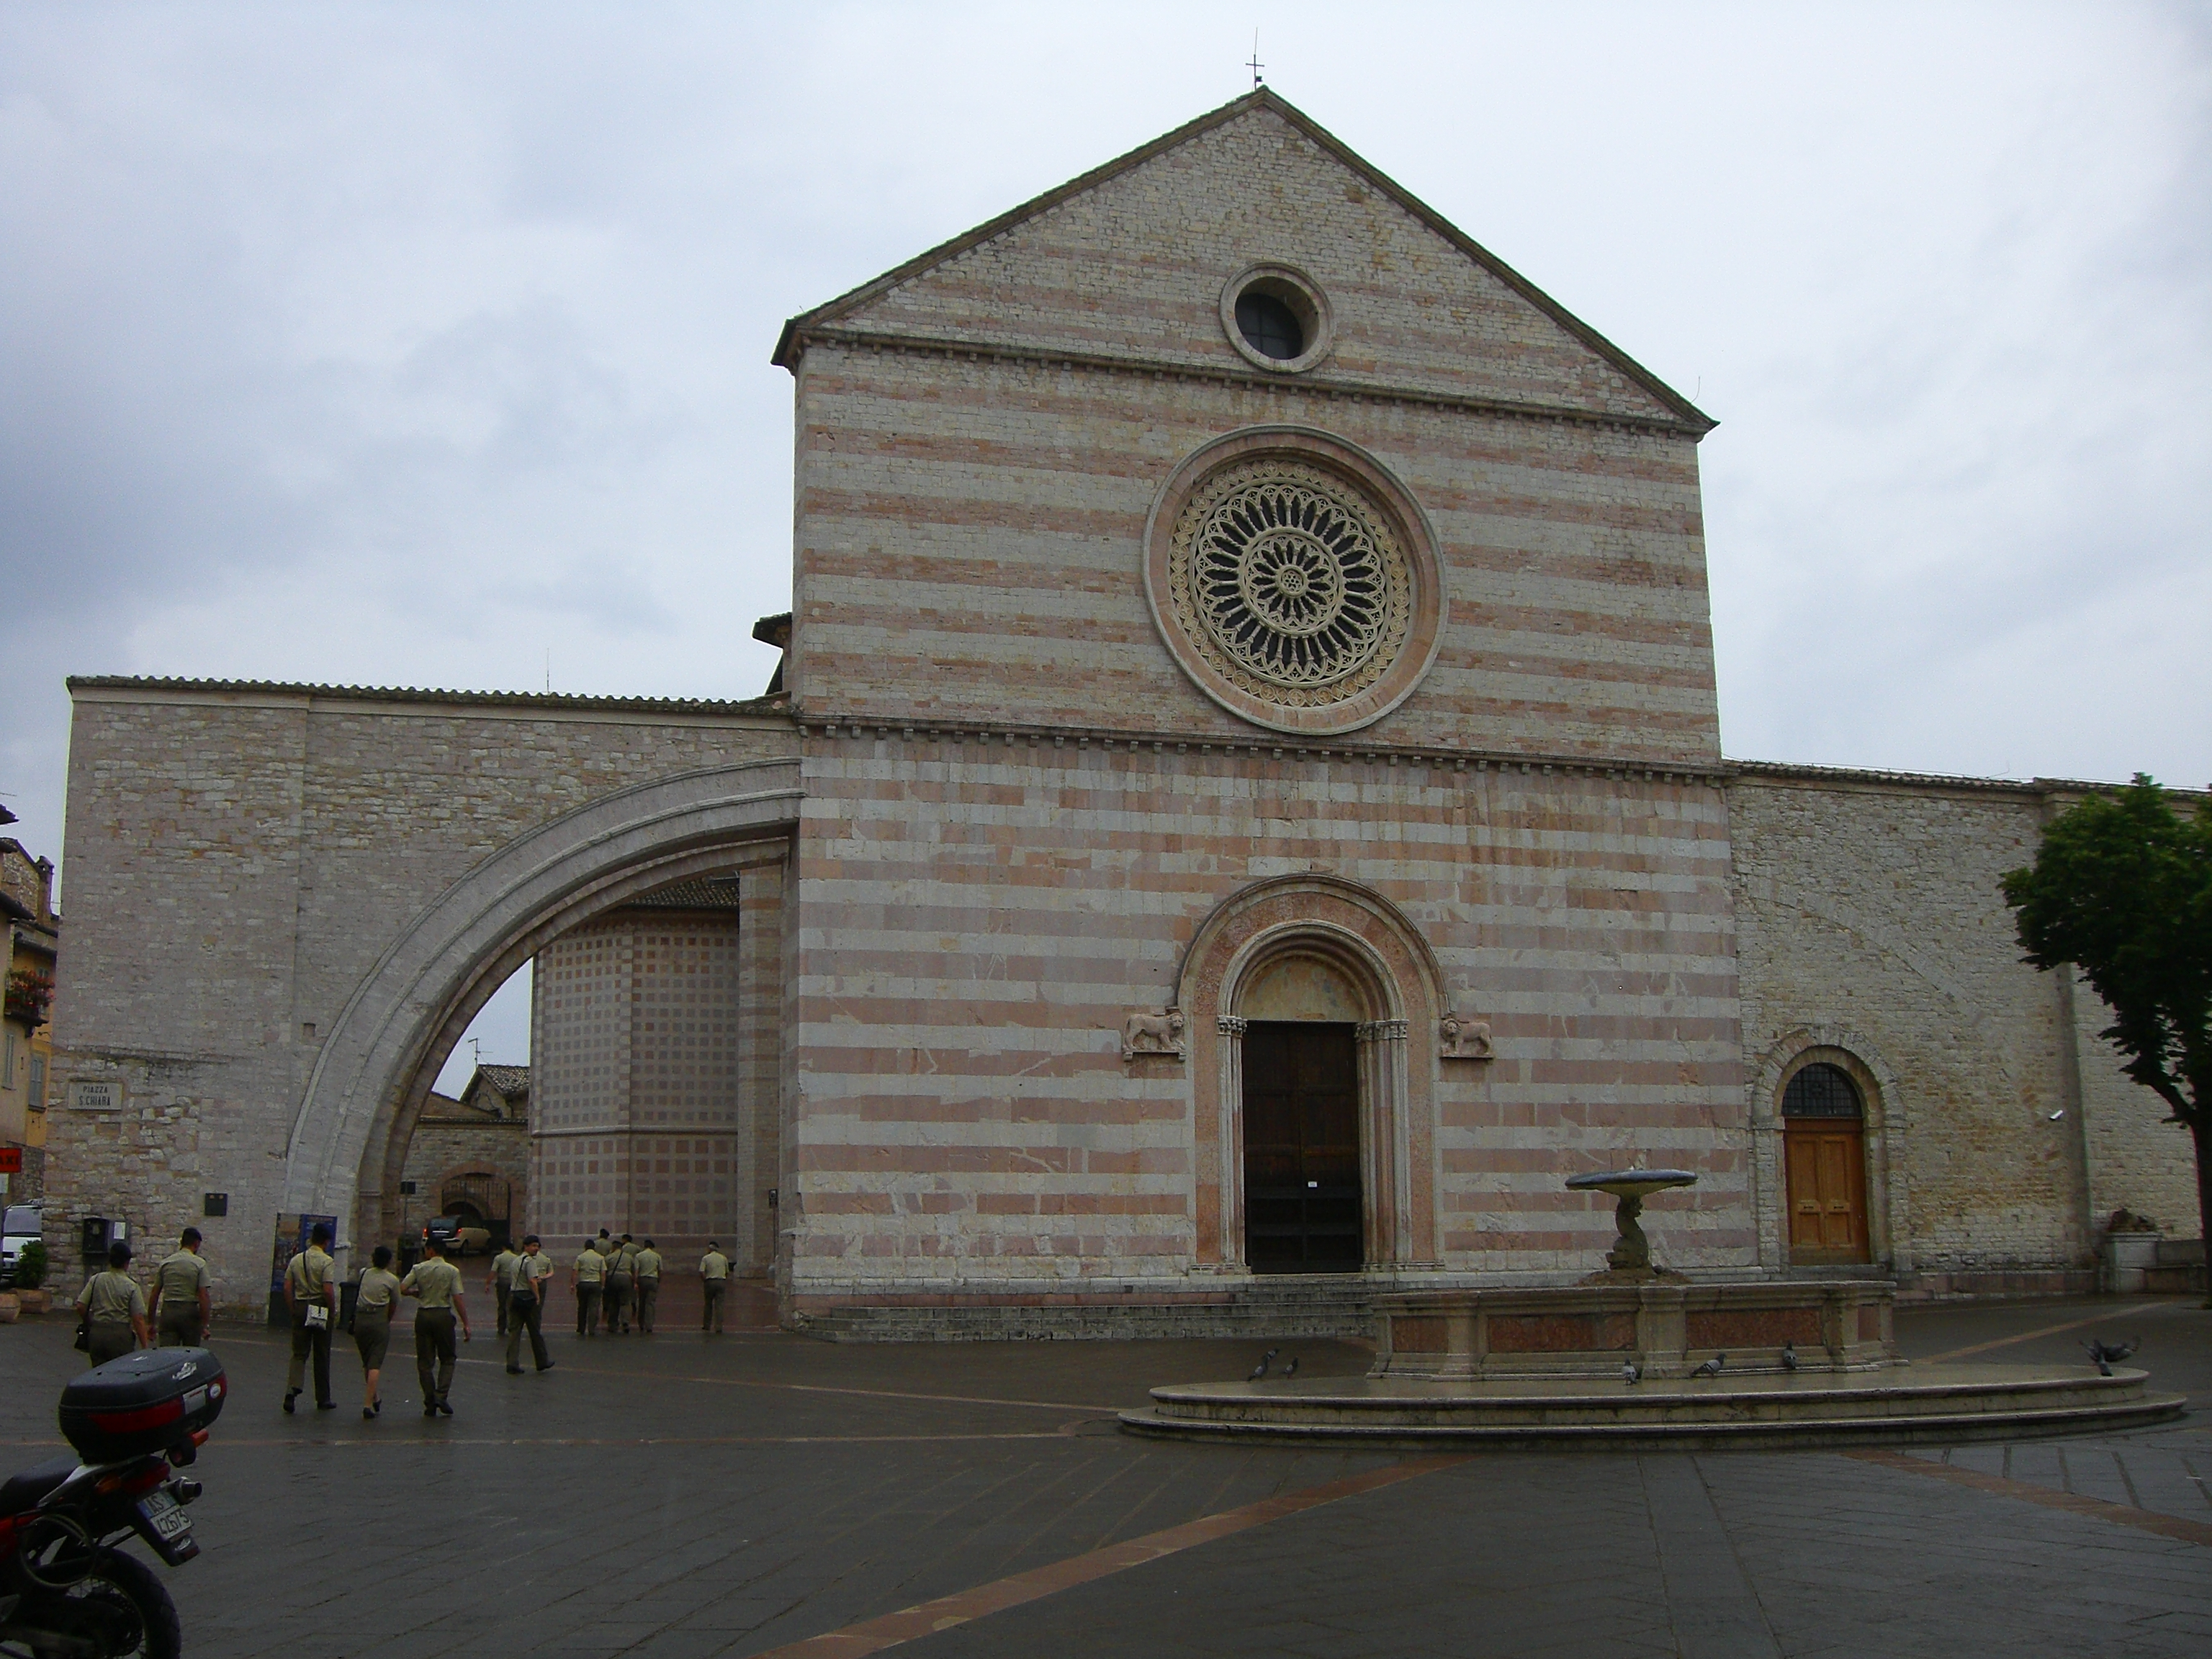 Basilica of Saint Clare in Assisi, Italy | Saint Mary's Press3072 x 2304